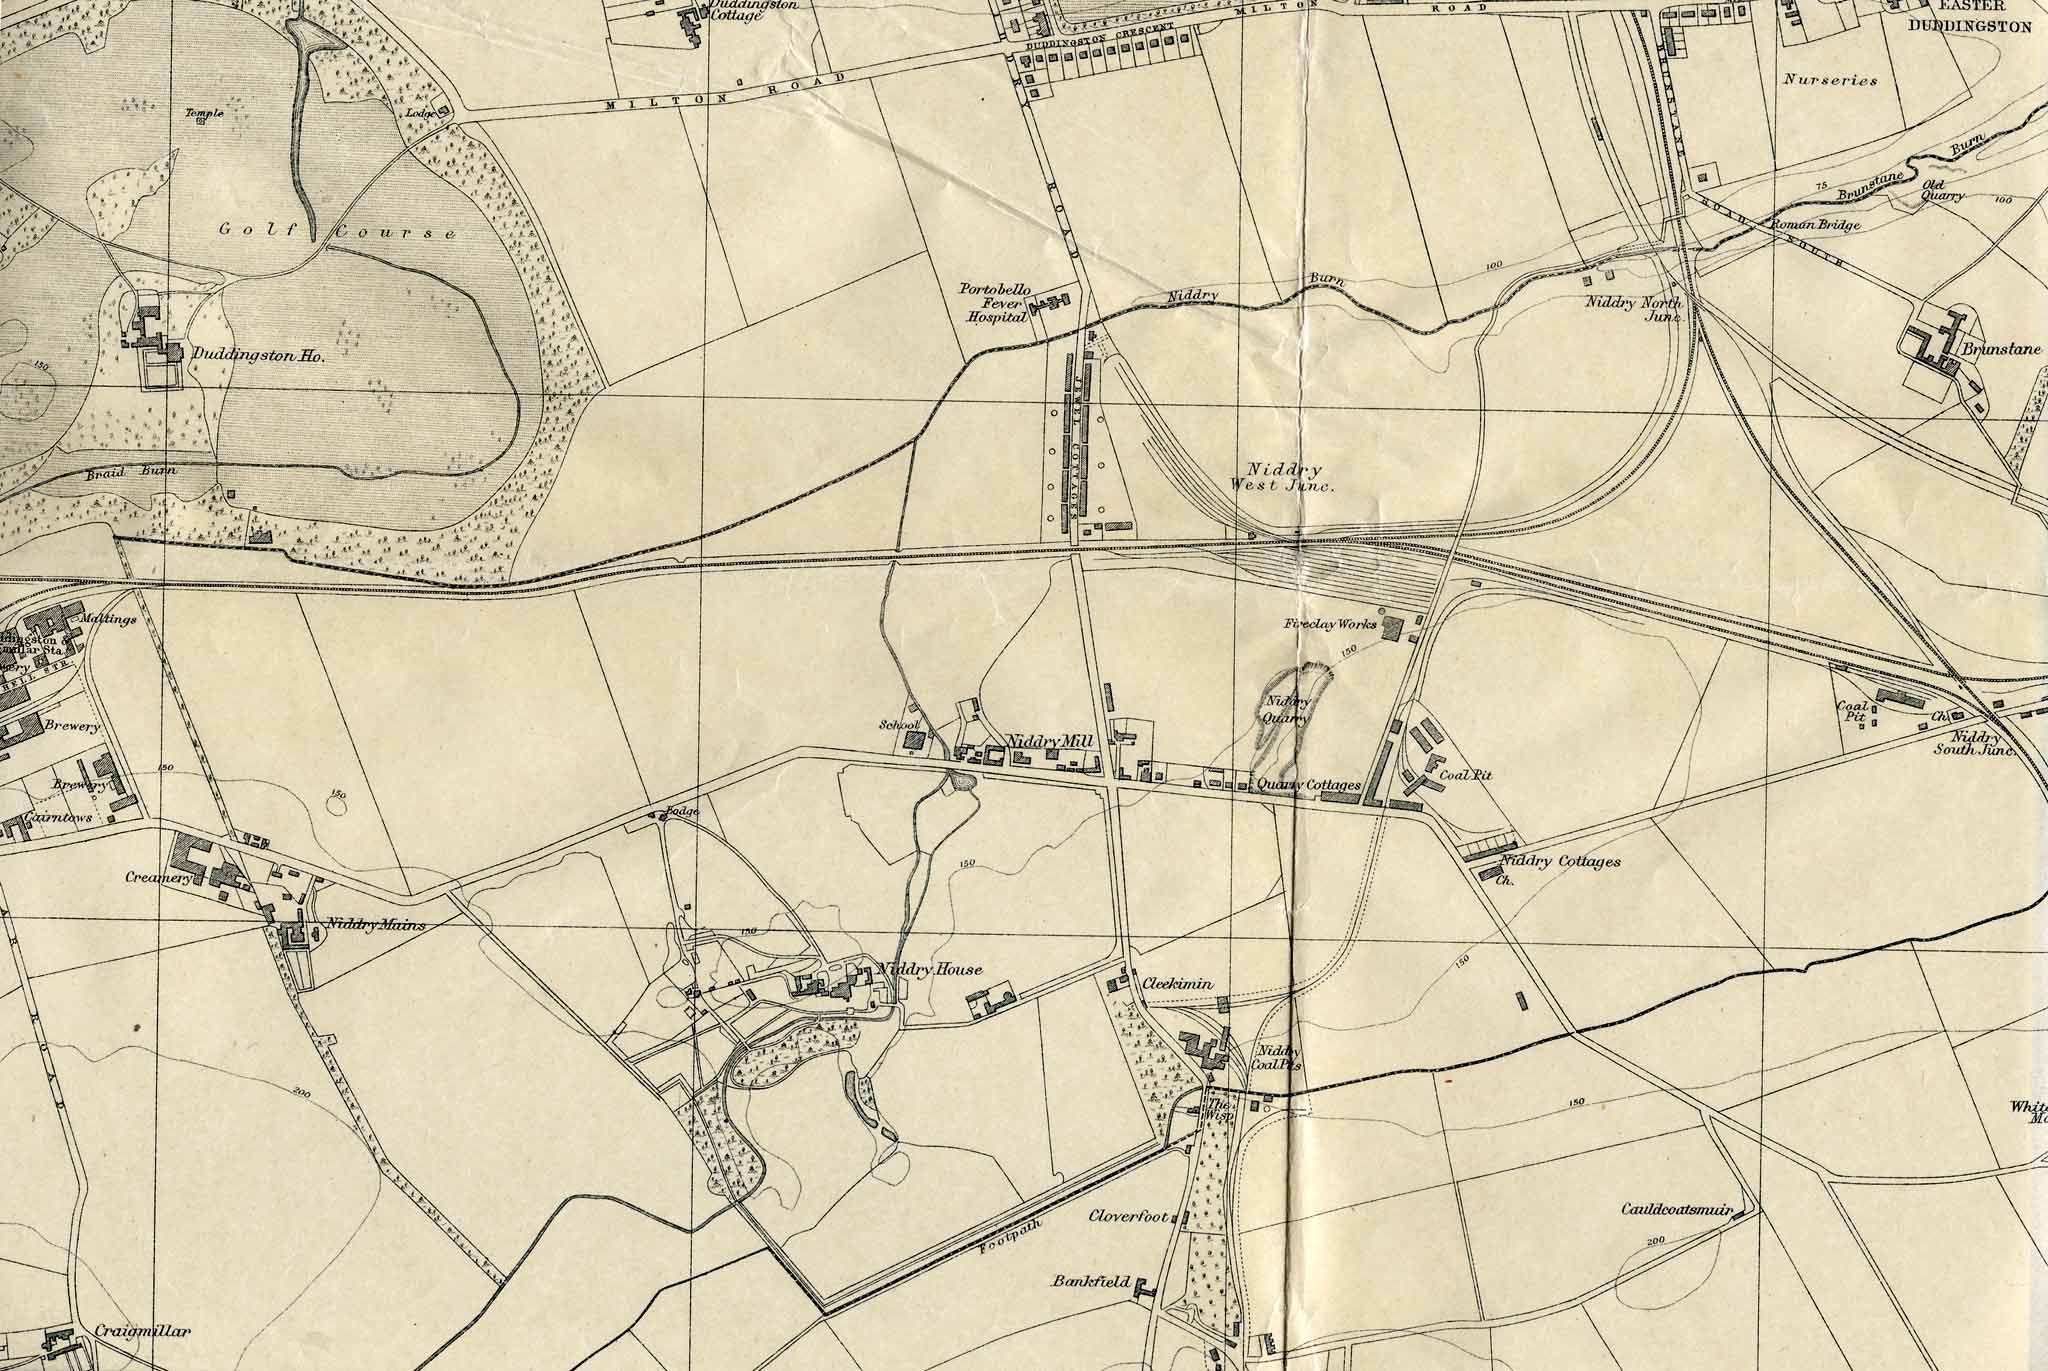 Edinburgh and Leith map, 1925  -  Niddrie and Craigmillar before the housing estates were built